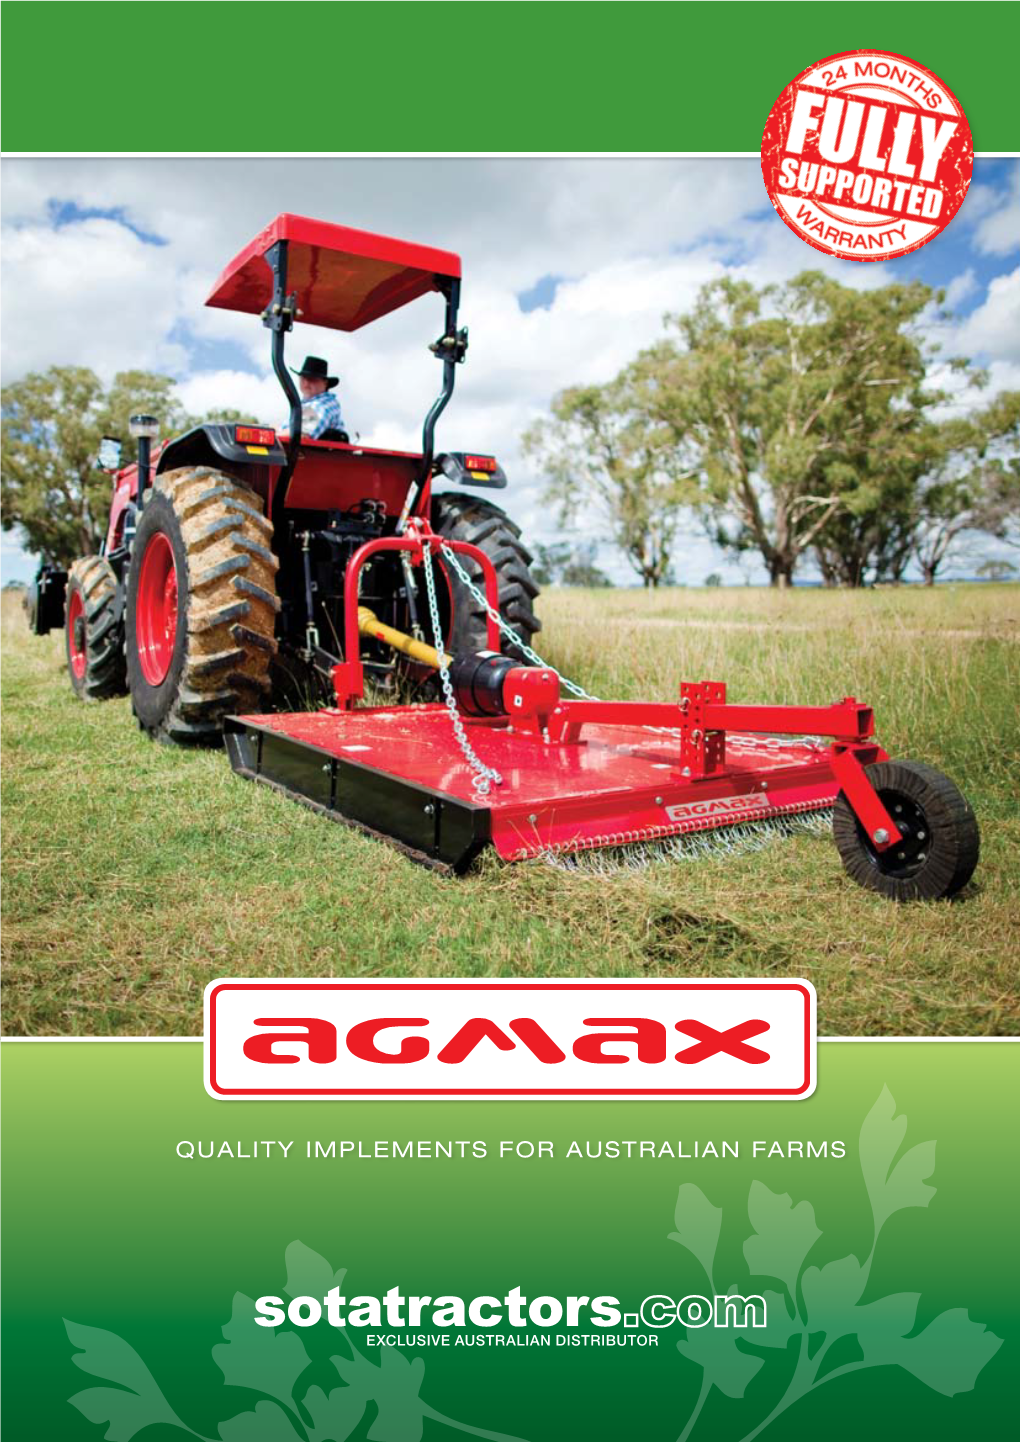 Download the AGMAX Brochure Here